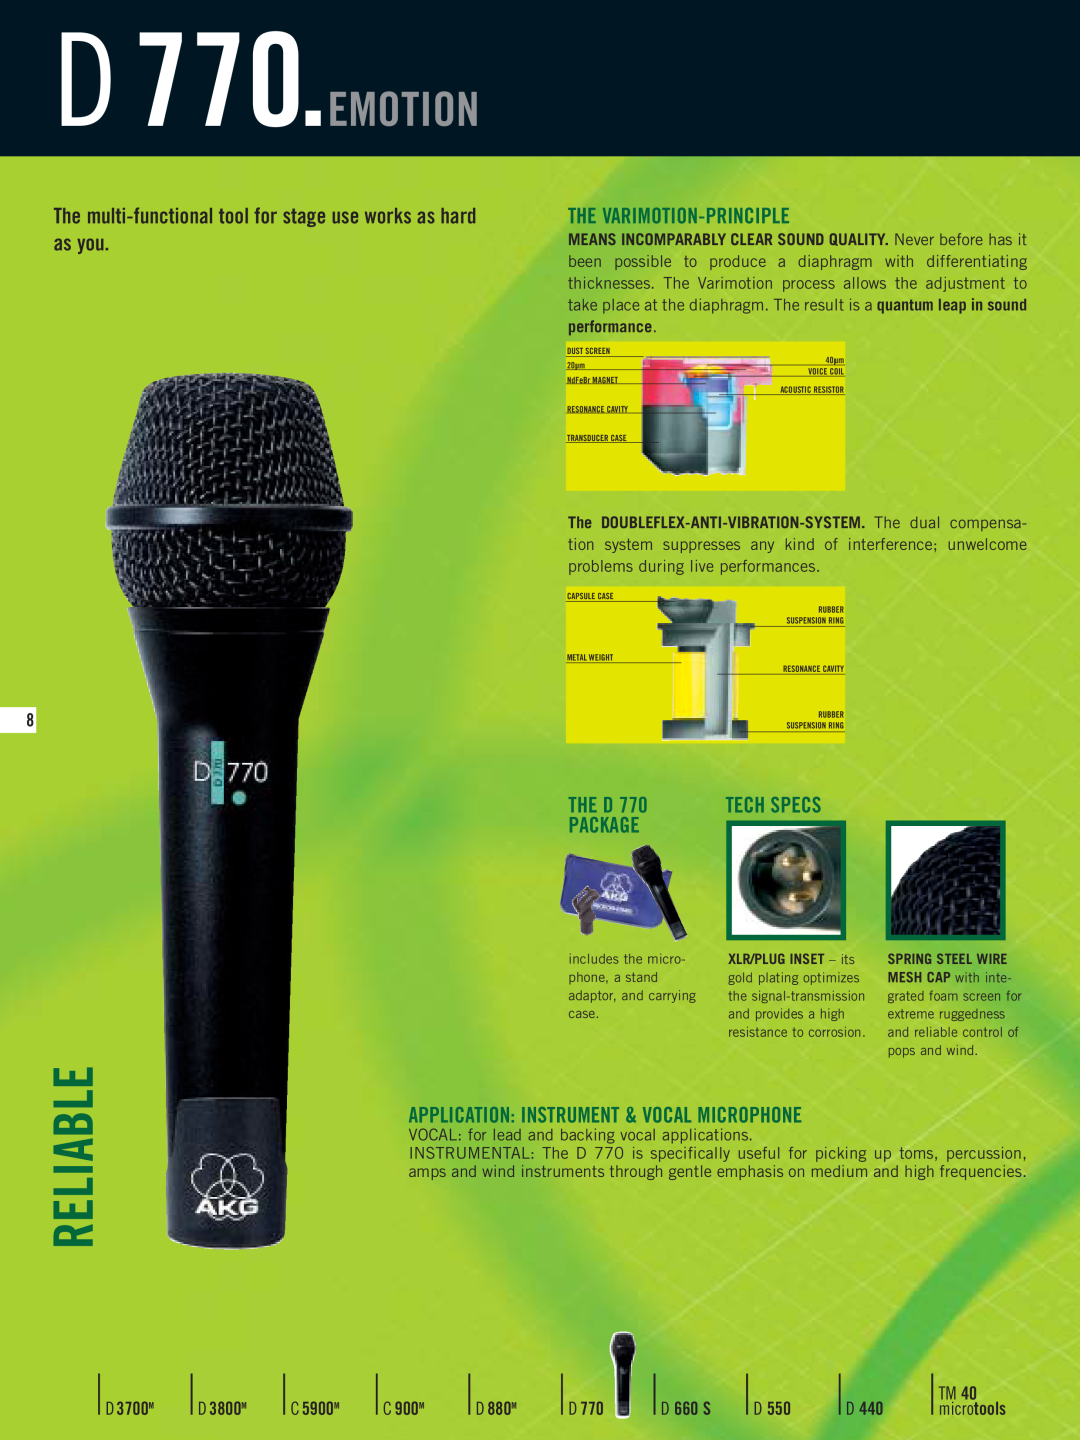 AKG Acoustics D3700M Reliable, D 770.EMOTION, The multi-functional tool for stage use works as hard as you, The D, Package 